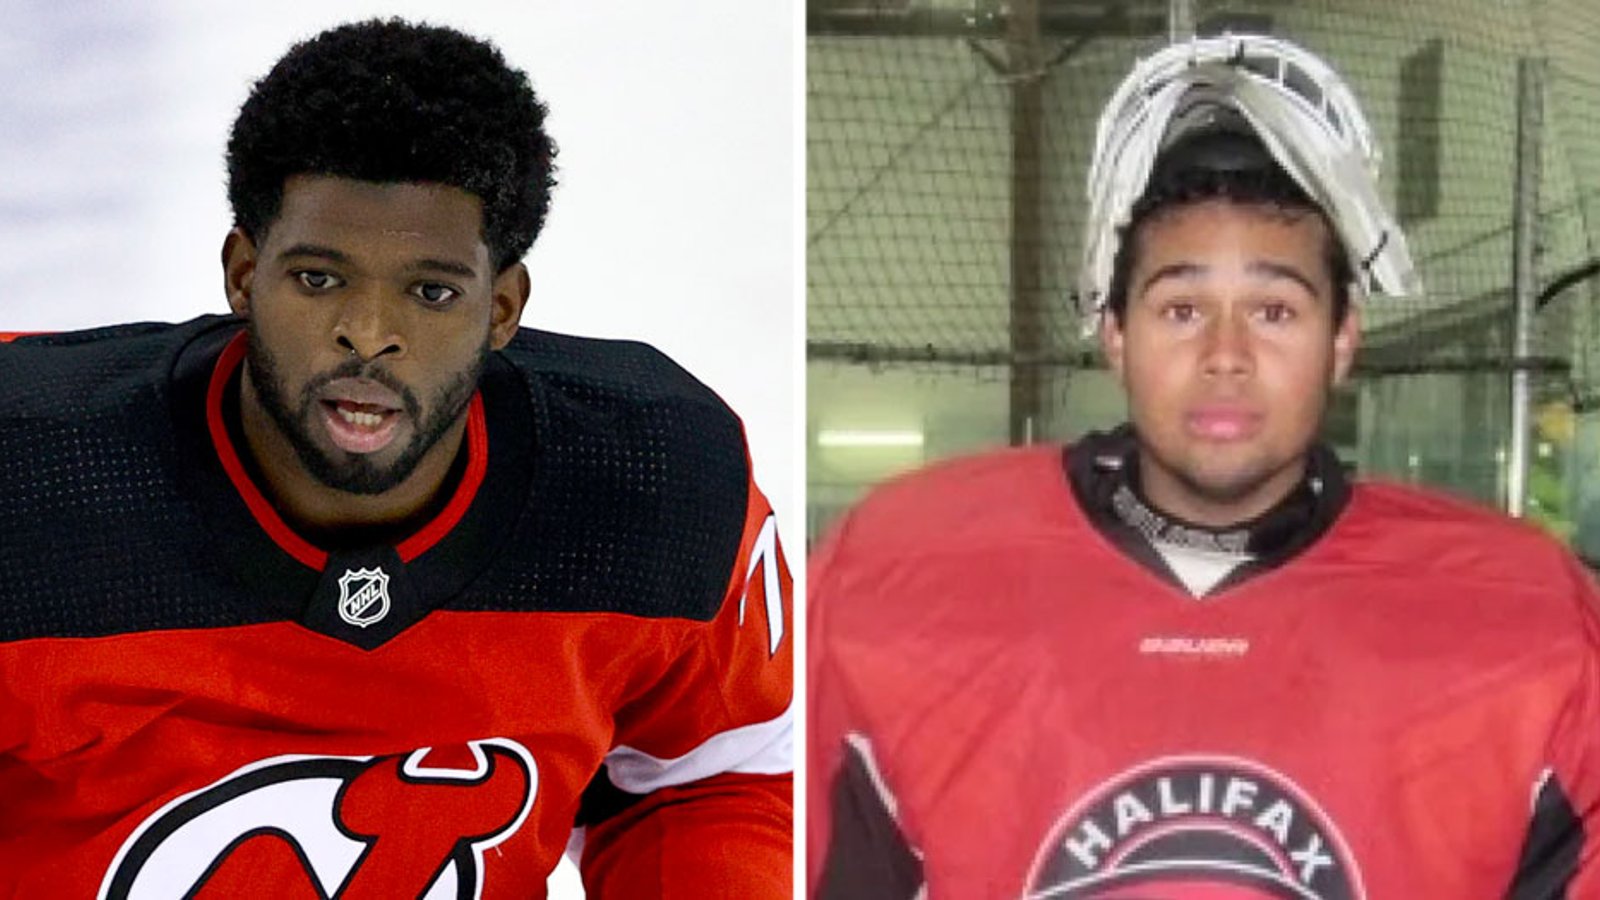 P.K. Subban speaks out after black teen suffers racial abuse at PEI hockey tournament